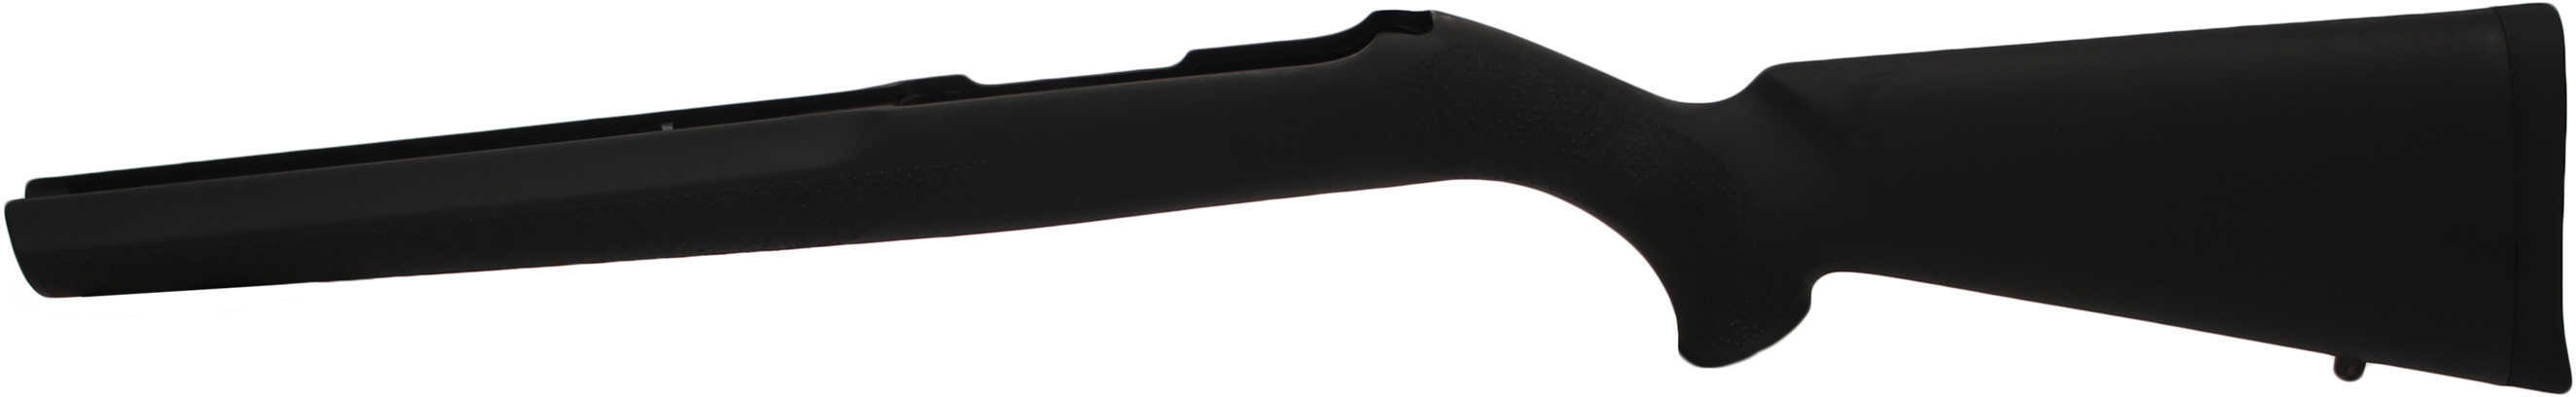 Hogue Rubber Overmolded Stock Ruger® 10/22® - .920" Diameter Barrel Channel - Black Palm swells - Varminter Style Forend